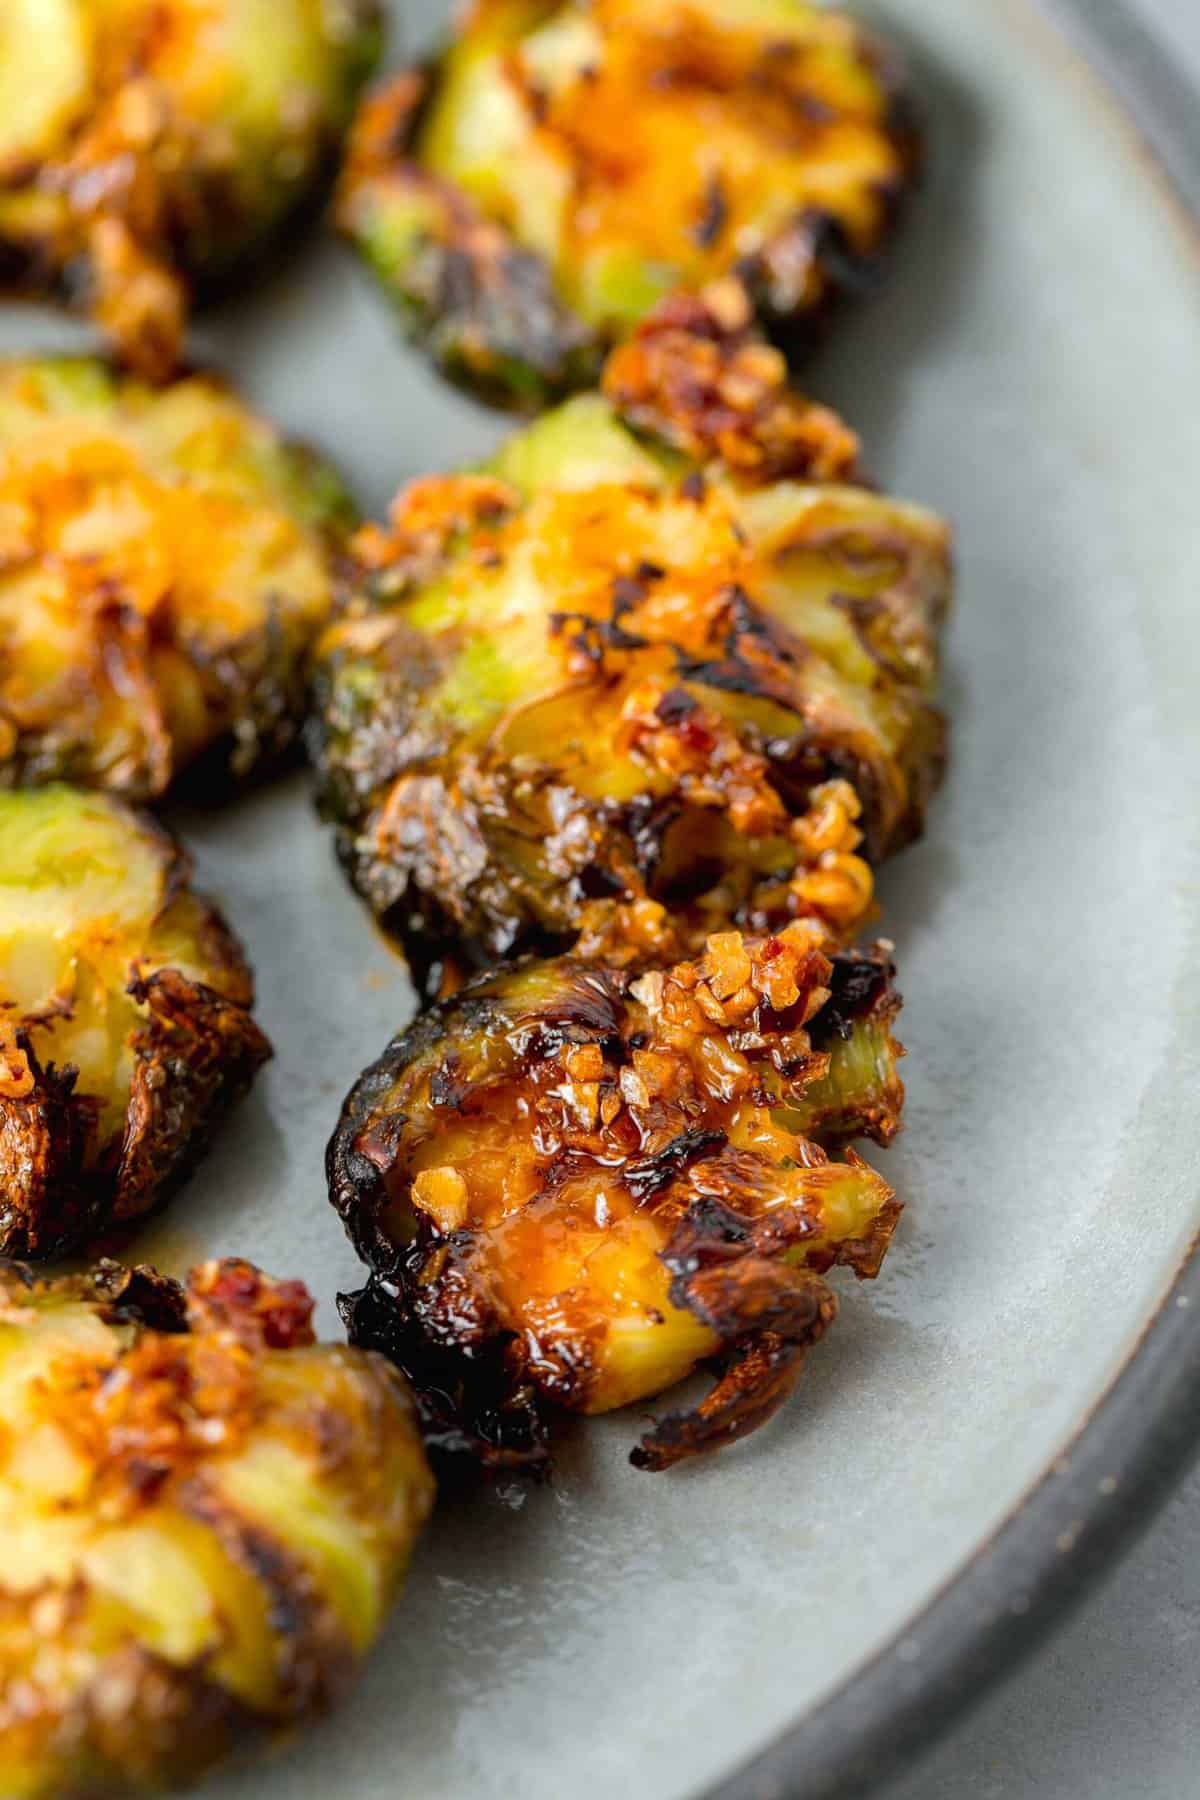 garlic chili crisp oil on top of crispy smashed brussels sprouts